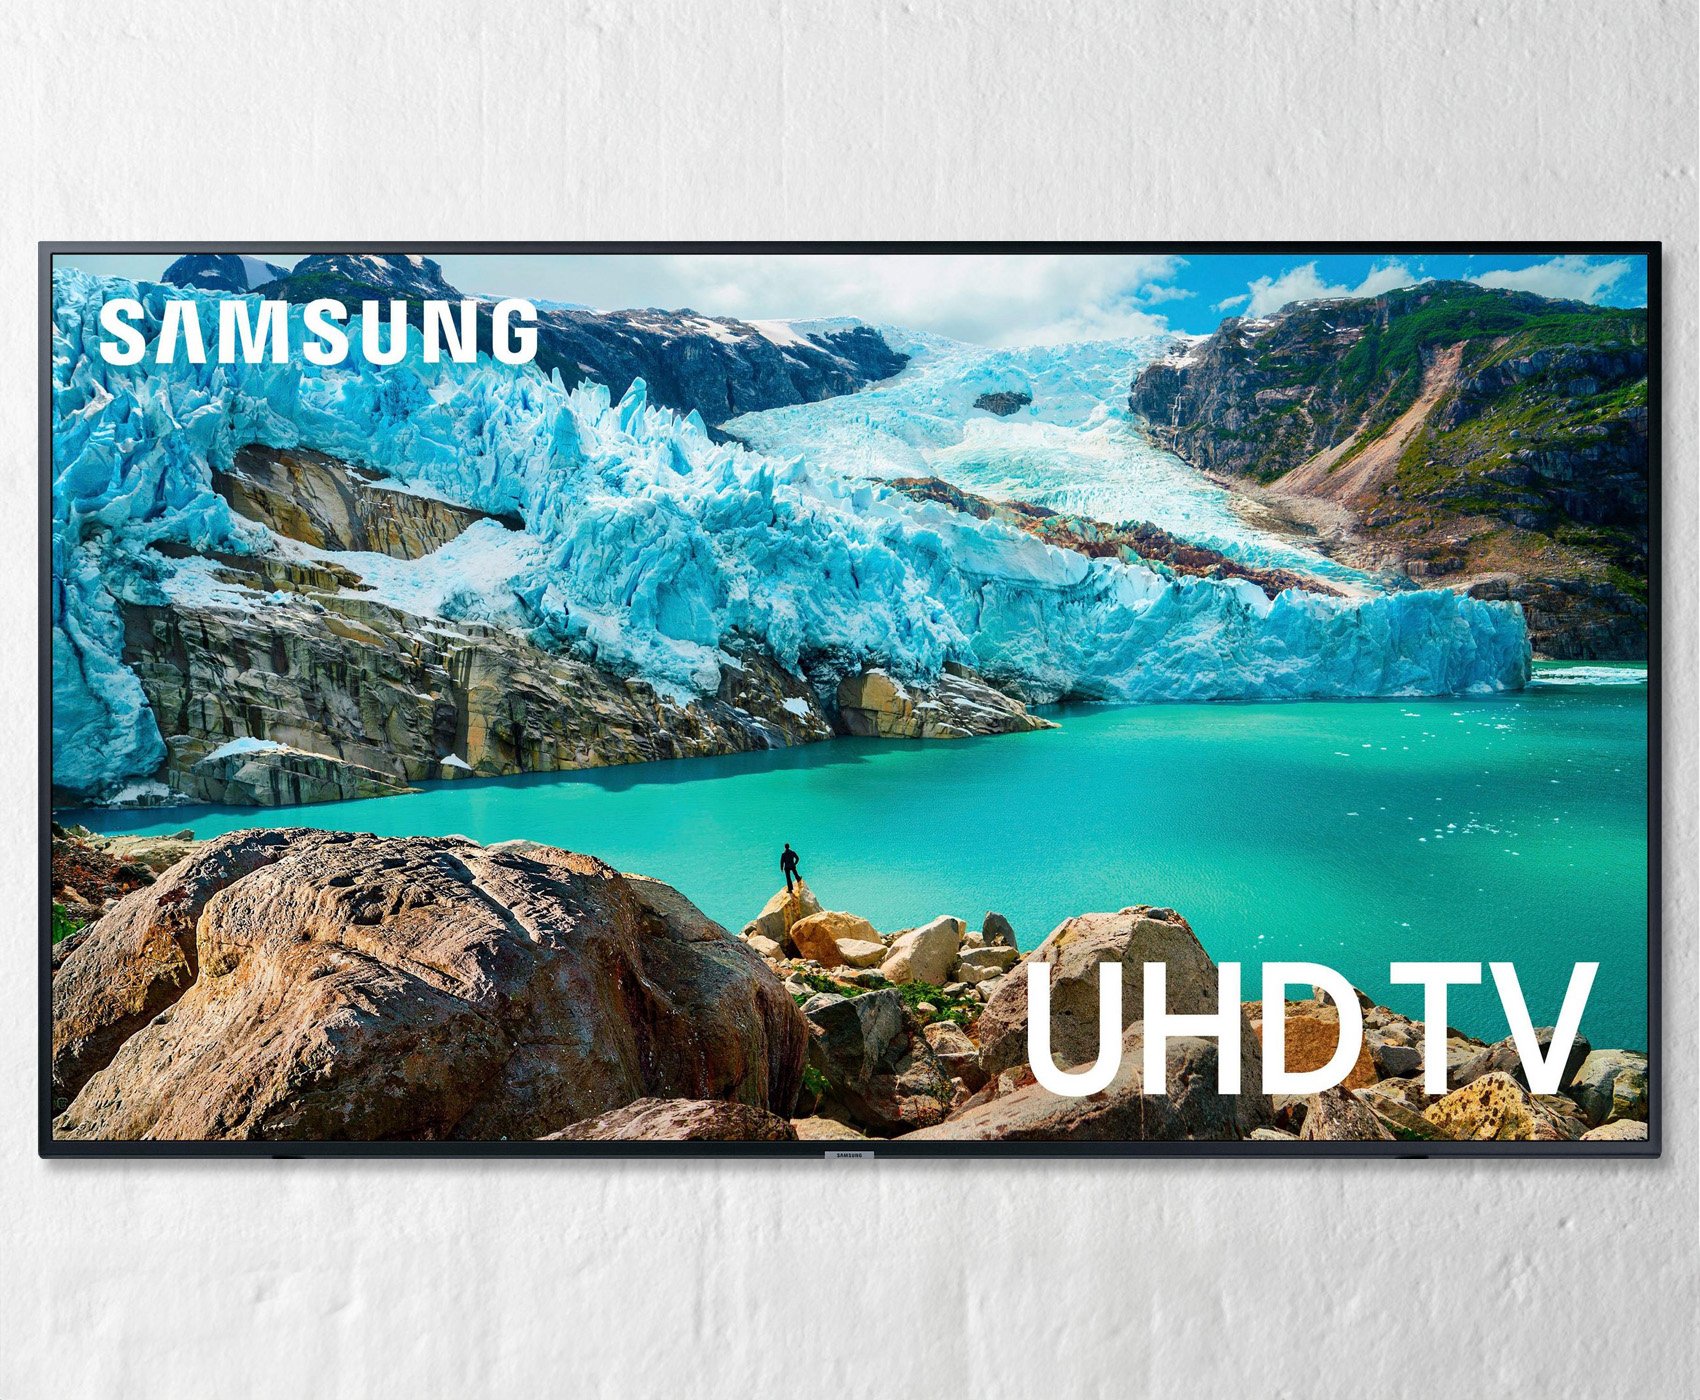 how to reset Samsung TV 1.0